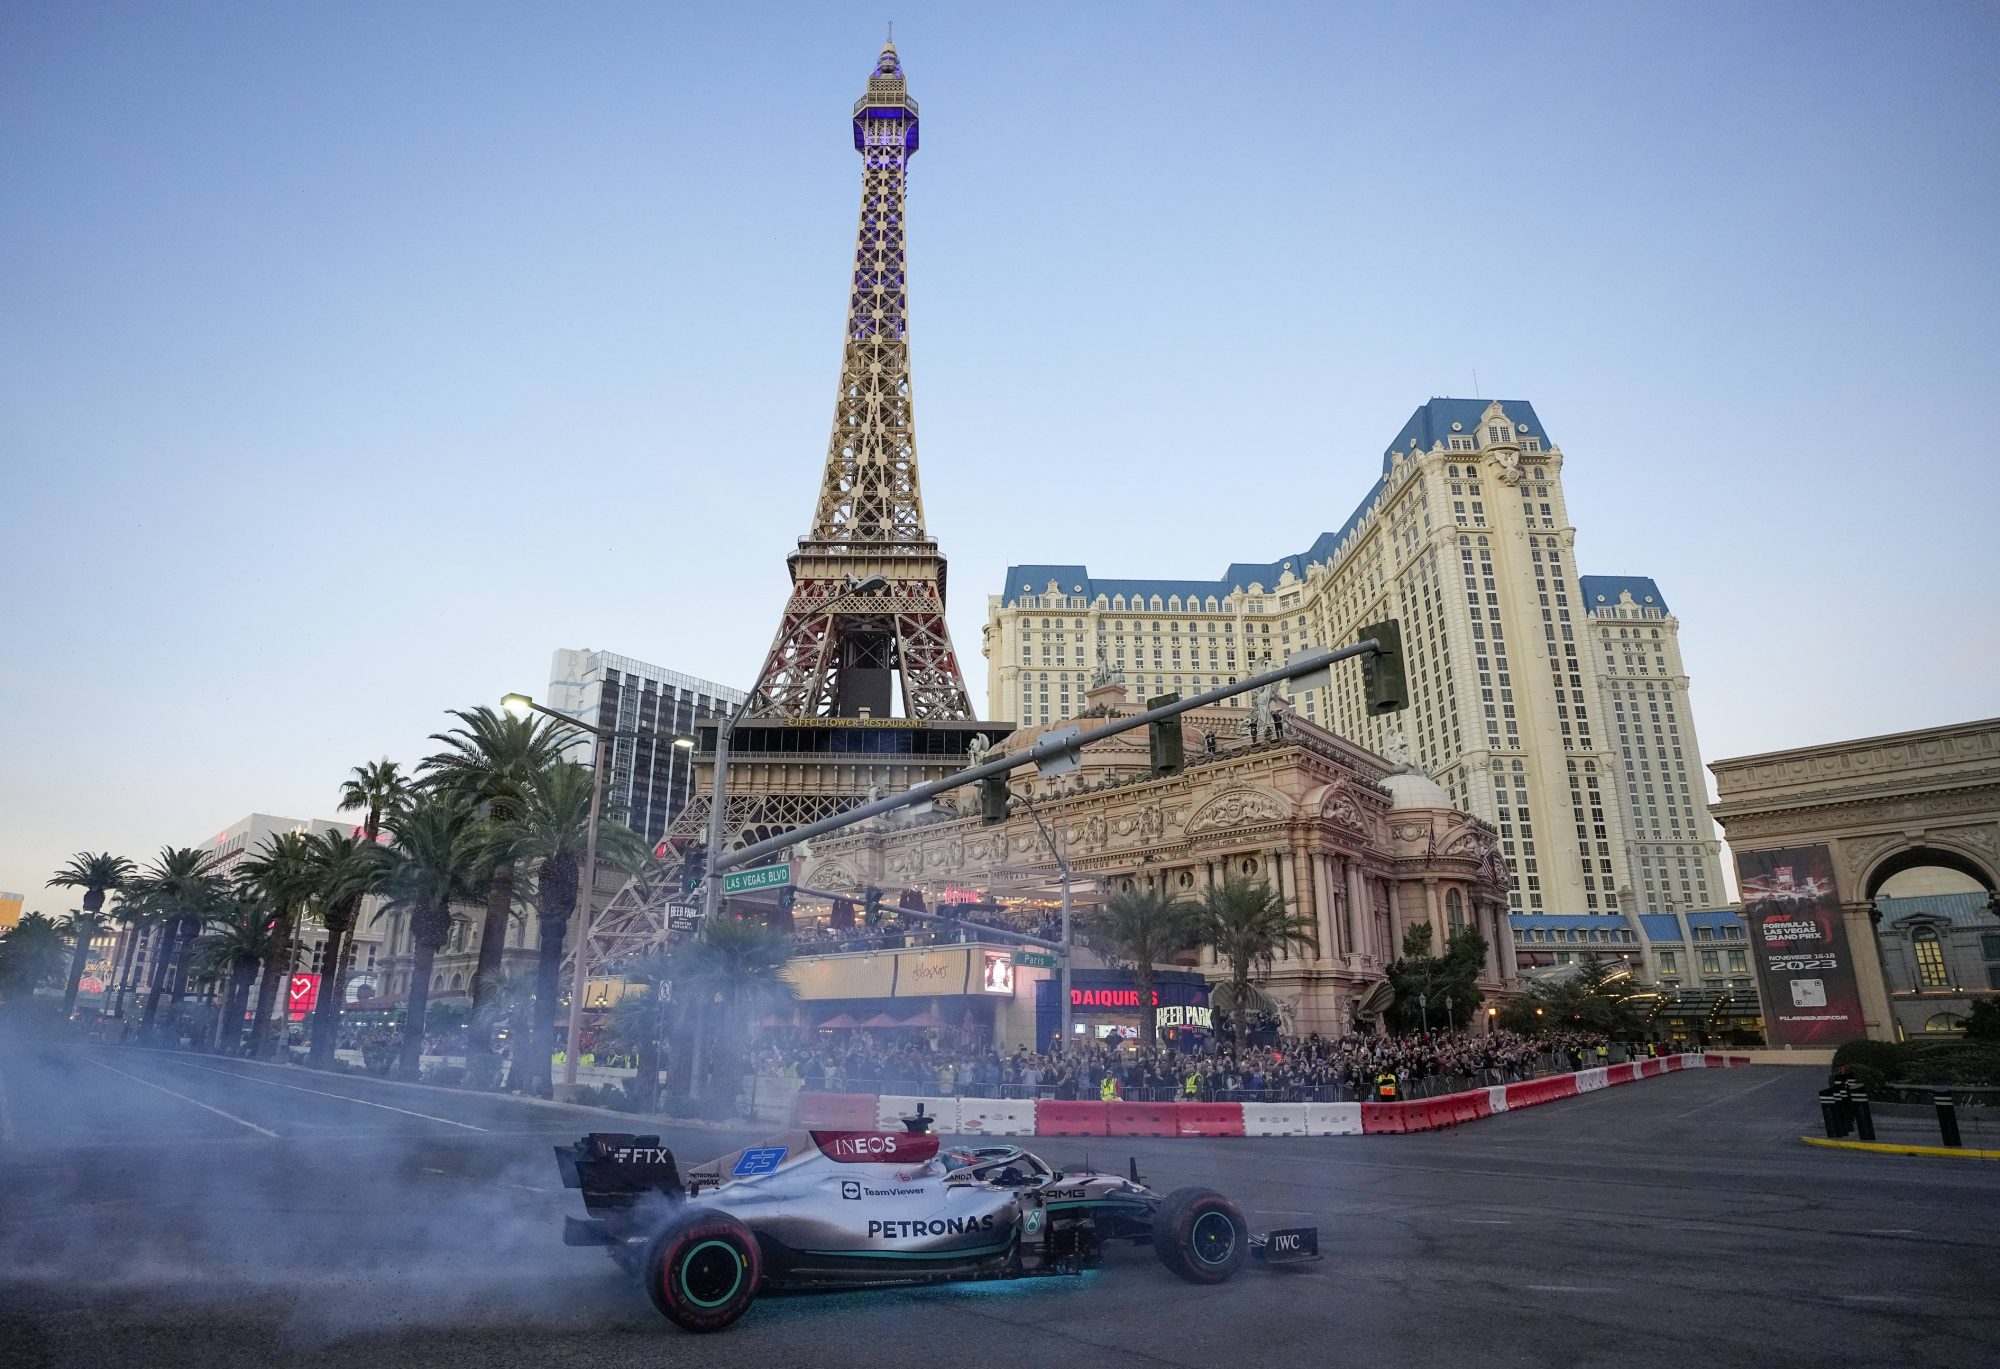 Why F1 needs the Las Vegas Grand Prix to succeed